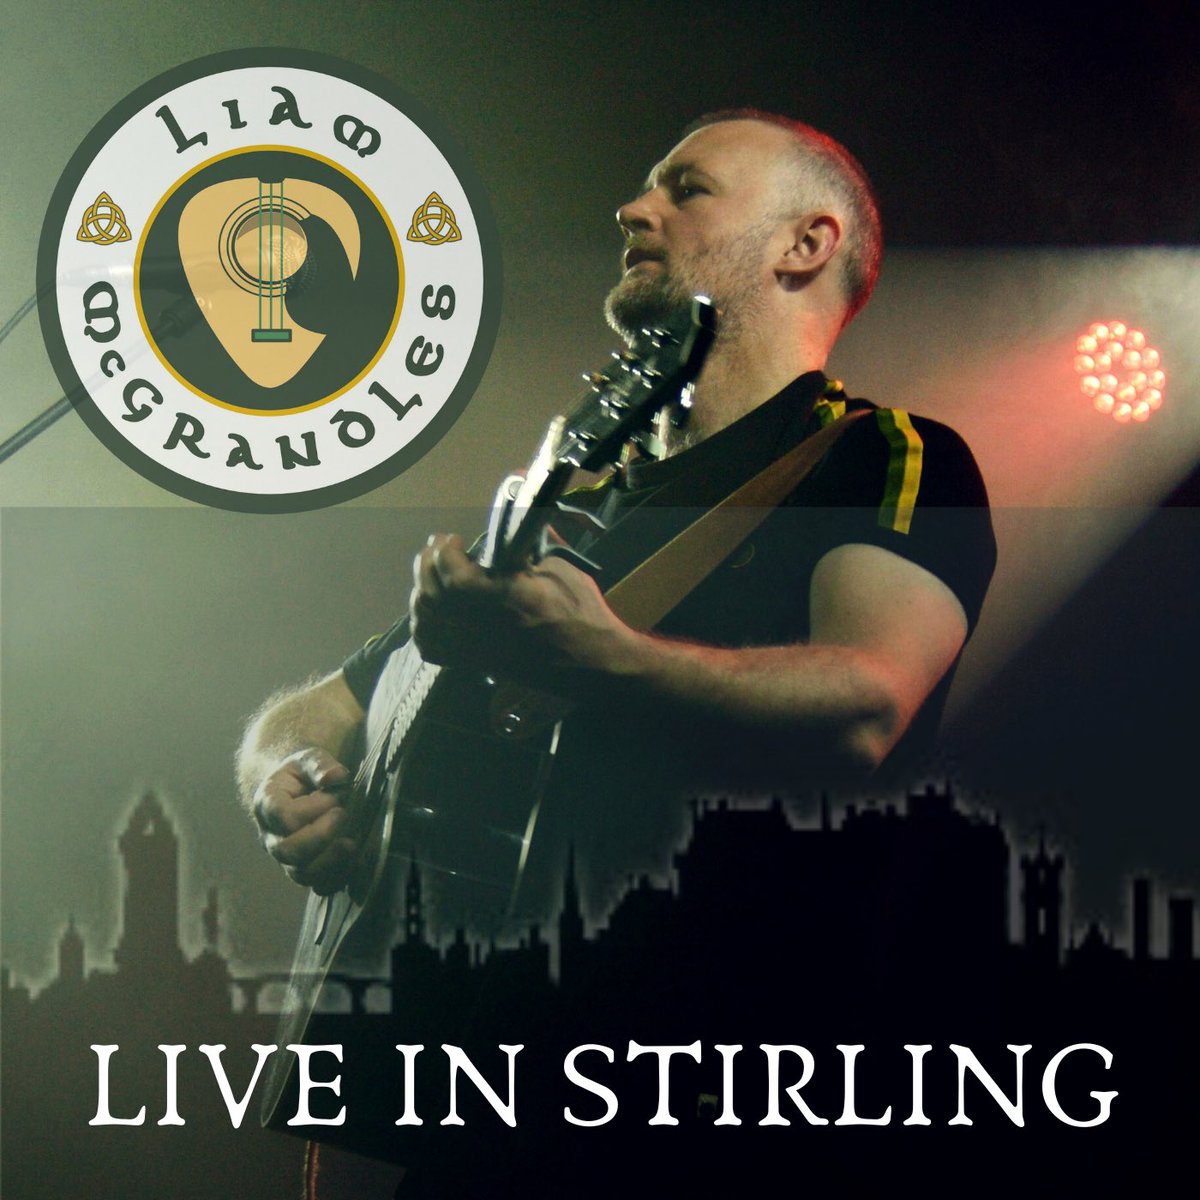 🎶🎶🍀🍀 New Release 🍀🍀🎶🎶 My first LIVE album is out now on all the streaming platforms. Give it a wee listen if ye can. It was recorded live at The Golden Lion, Stirling on Boxing Night. A cracking night with a great atmosphere.